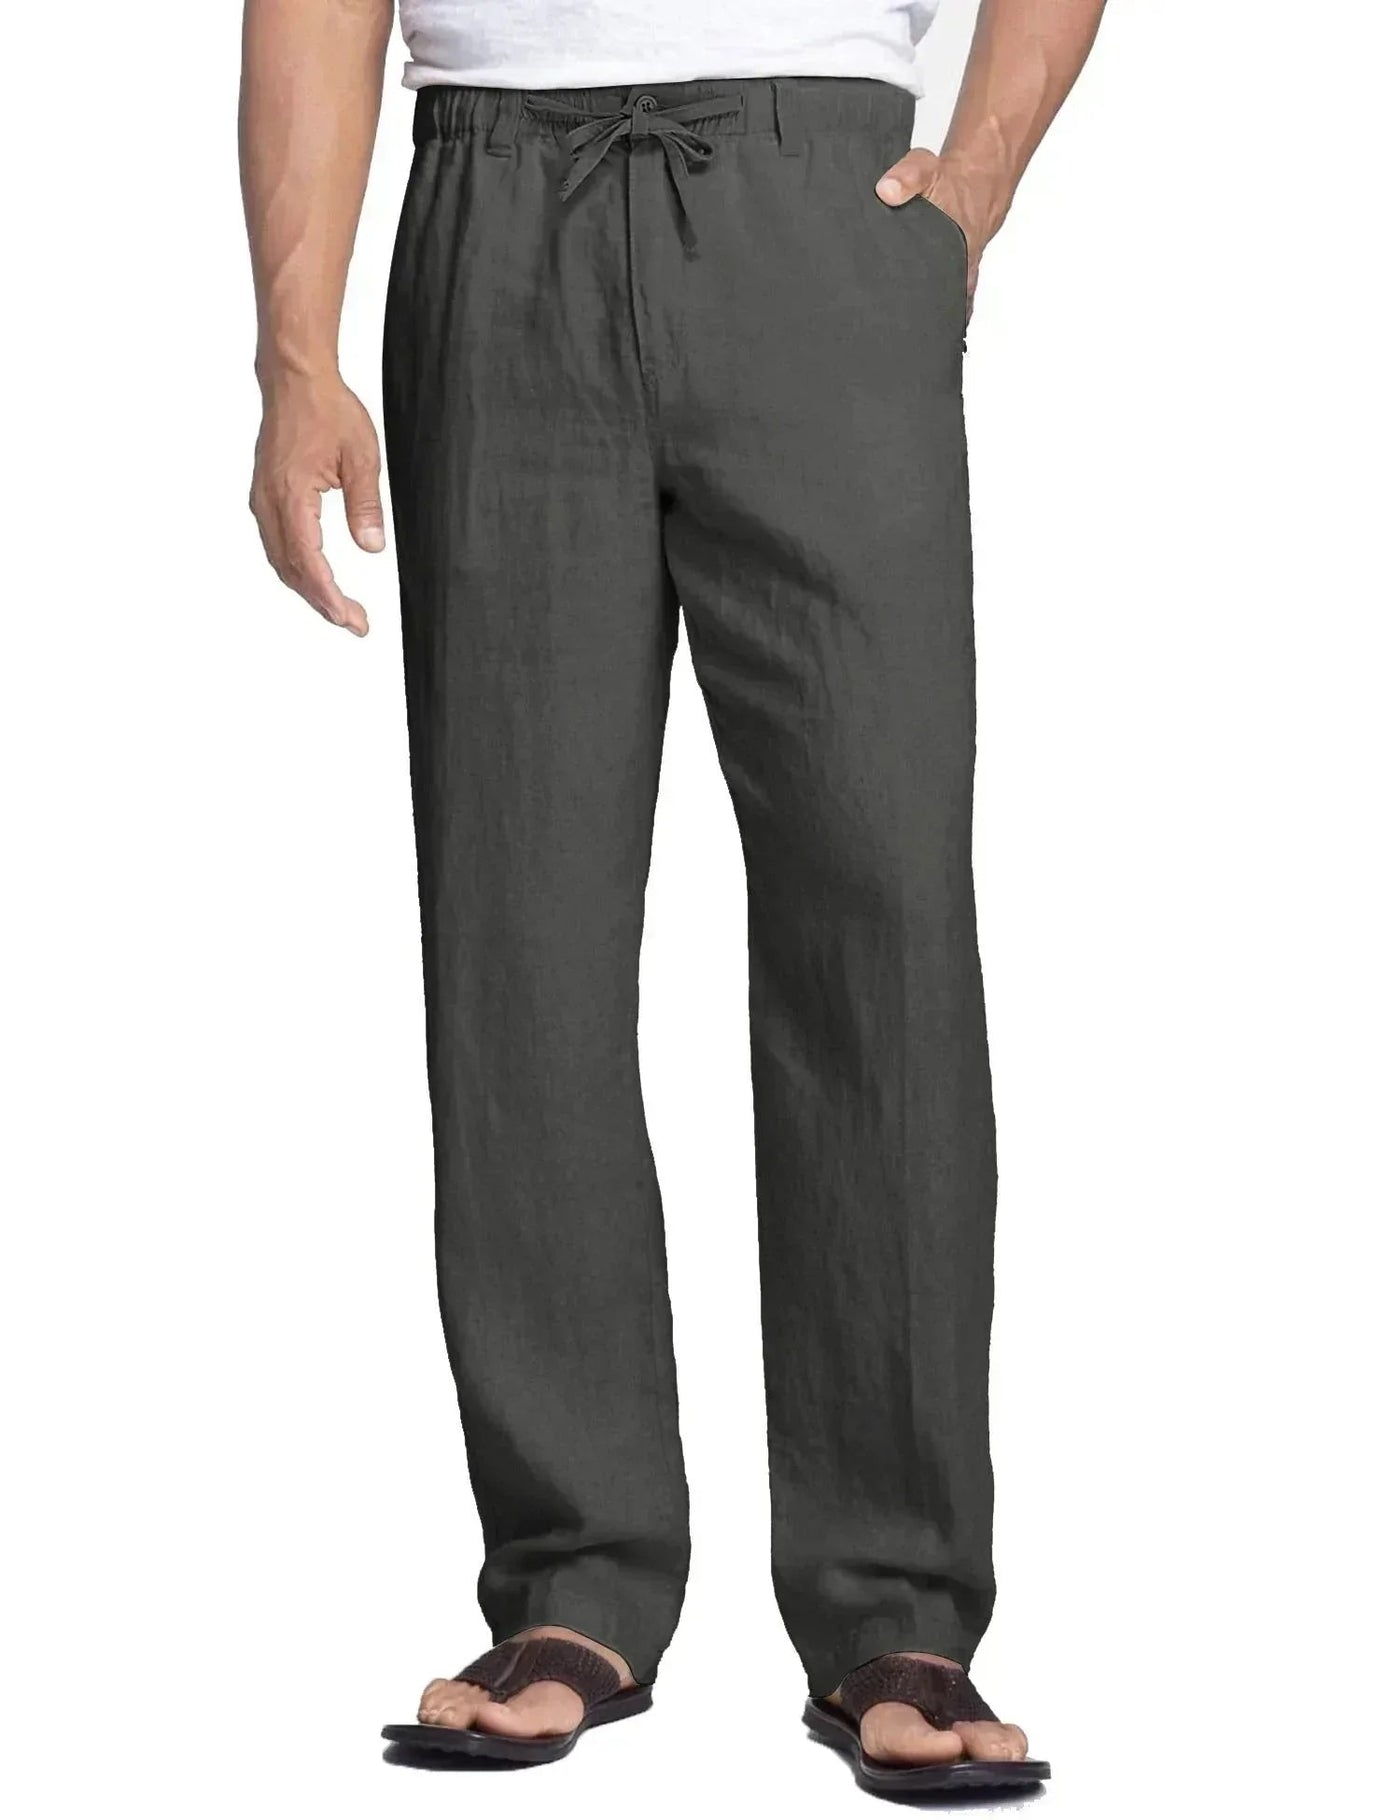 Coofandy Casual Cotton Style Trousers (US Only) Pants coofandy Dark Grey S 